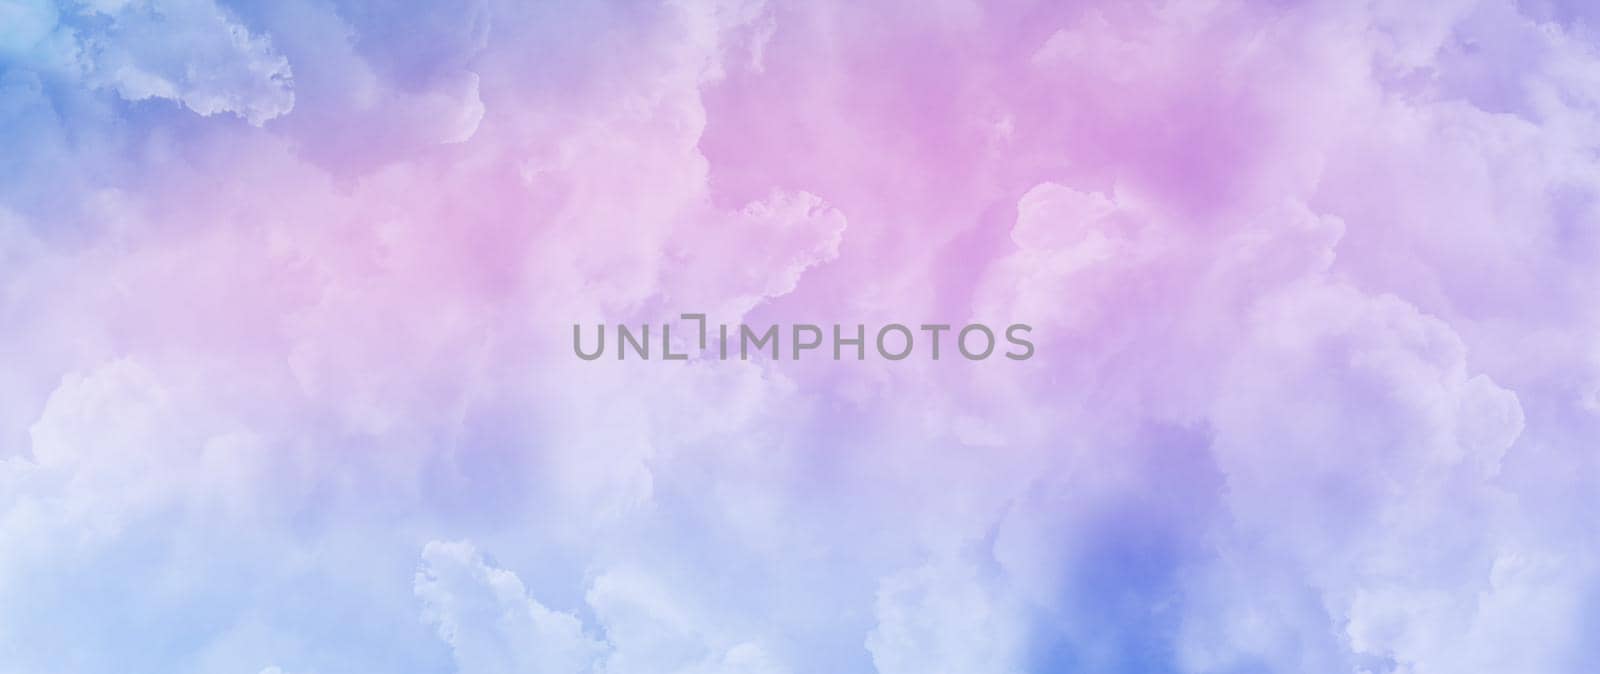 Luxurious And Elegant Watercolor Lively Multicolored Light PurpleBanner Background Wallpaper Festivity by yay_lmrb